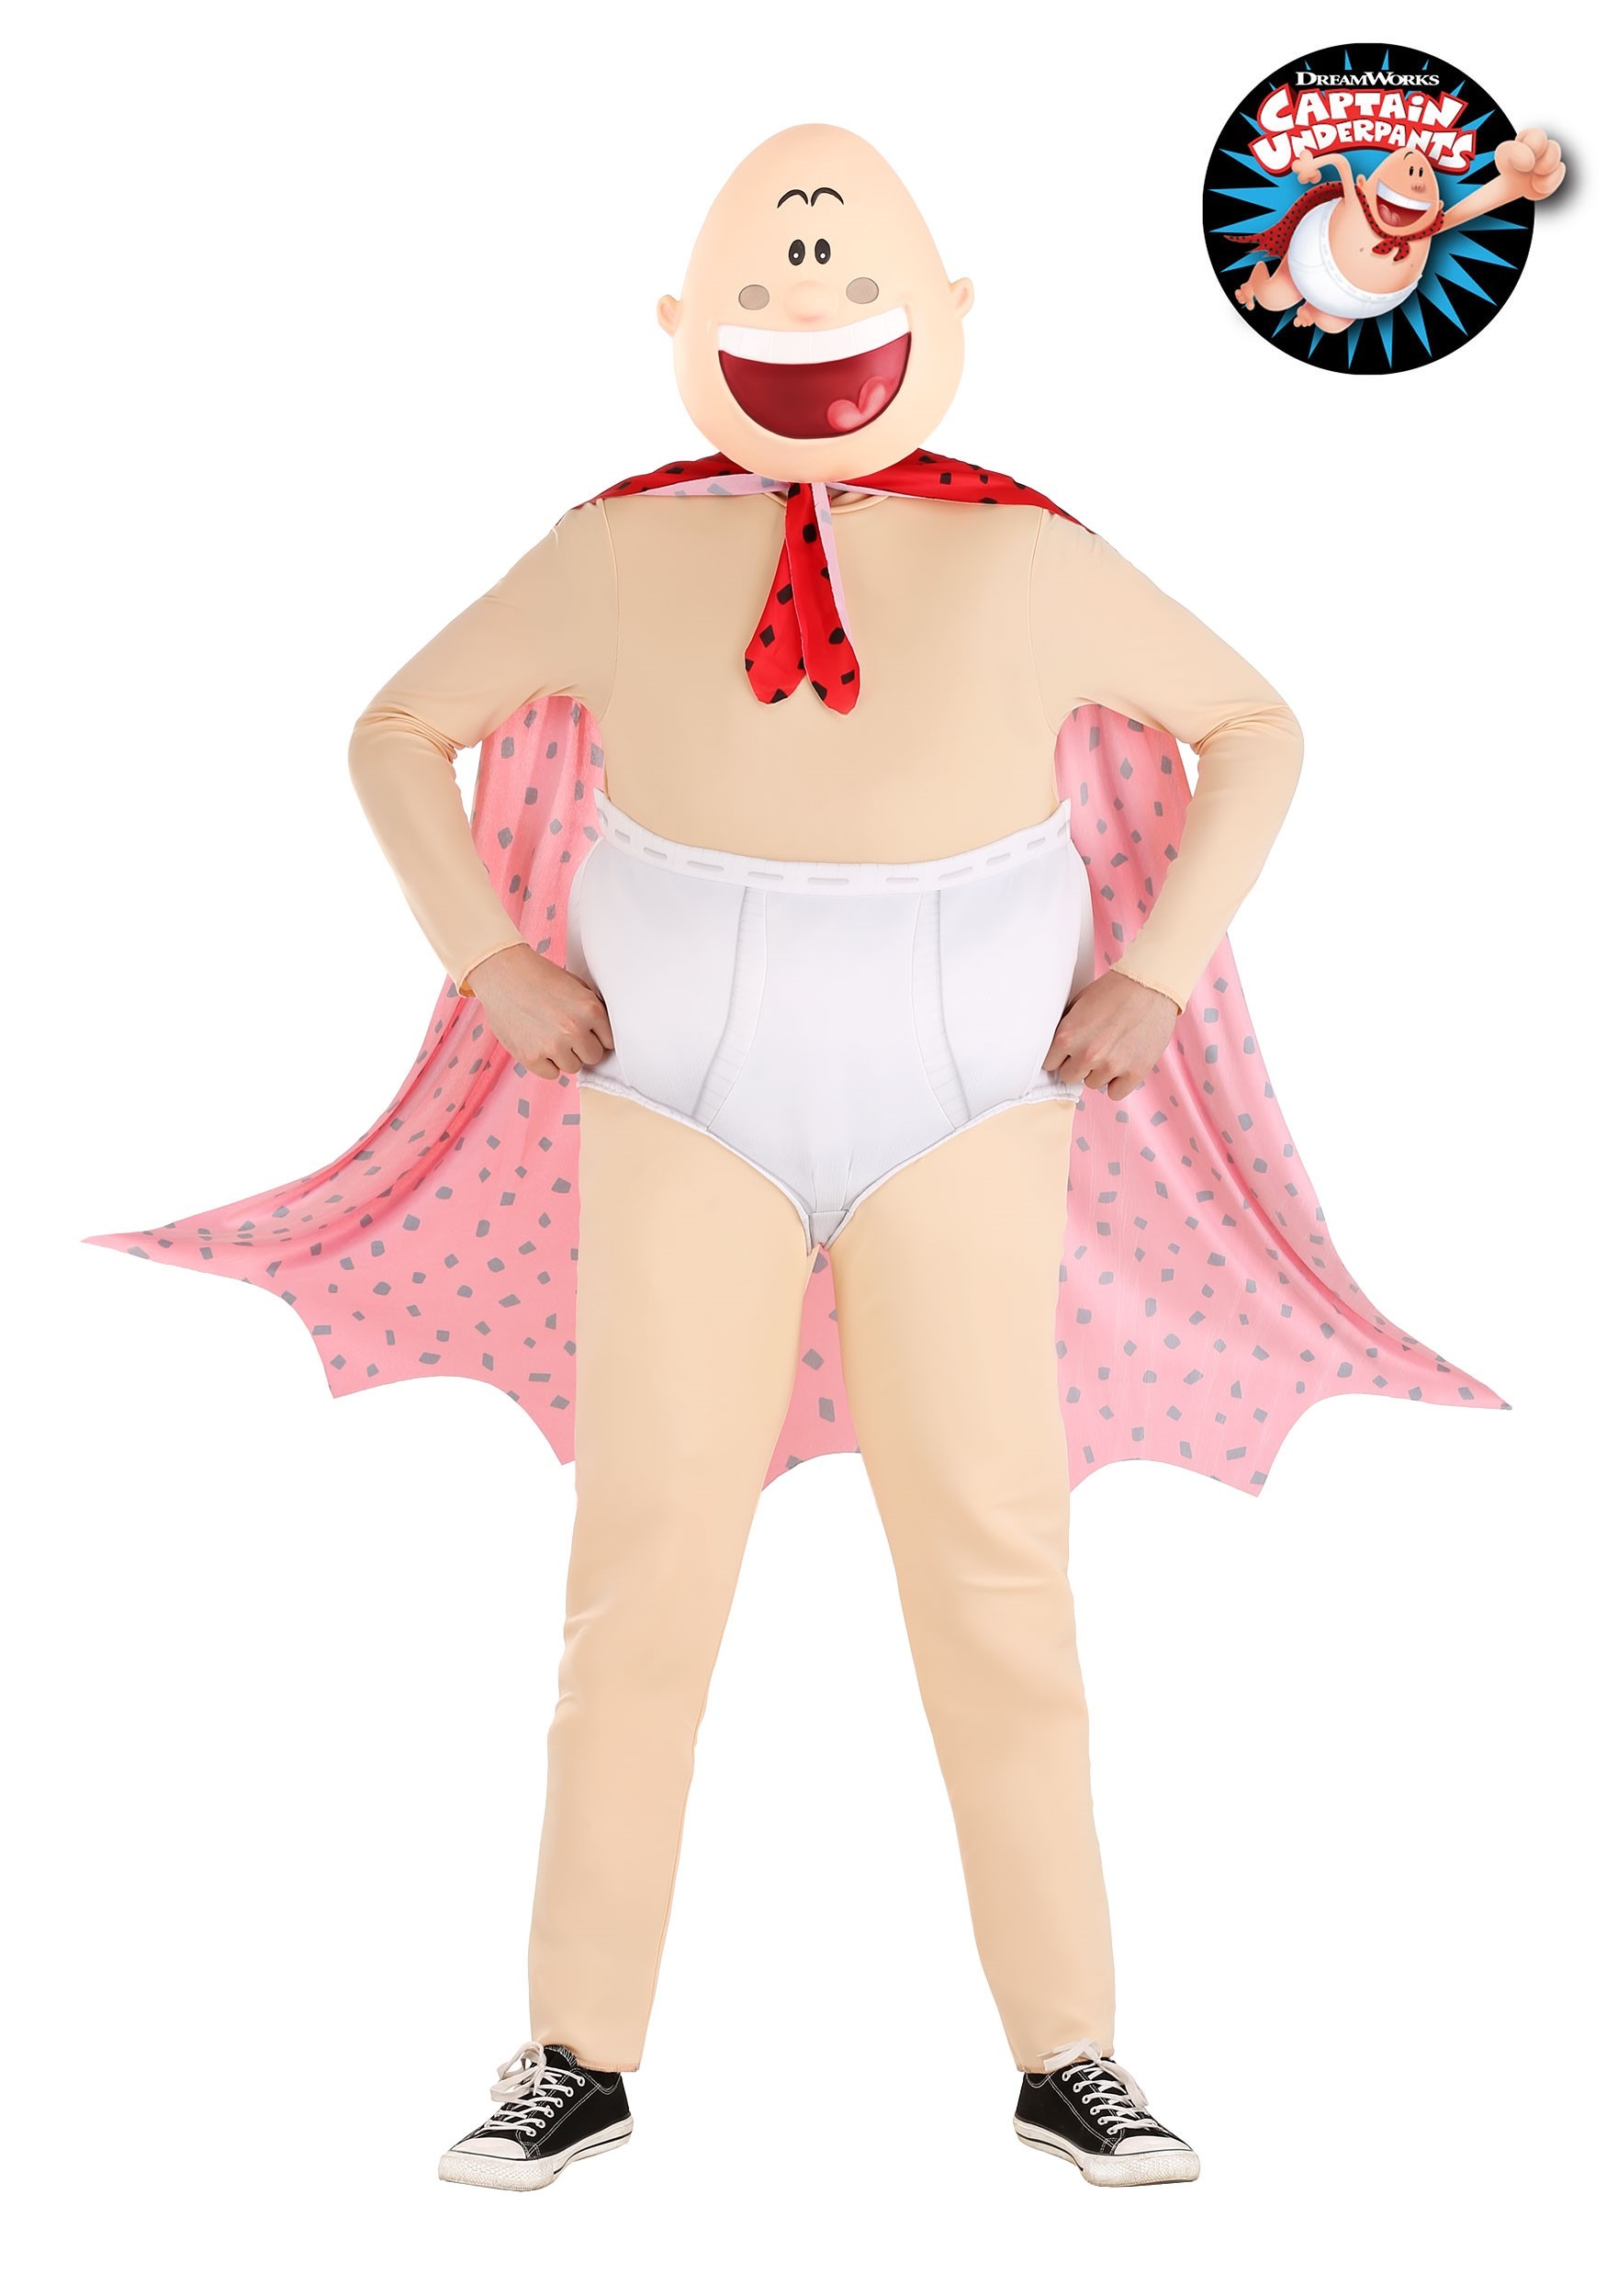 https://images.halloweencostumes.com/products/69107/1-1/captain-underpants-adult-costume.jpg